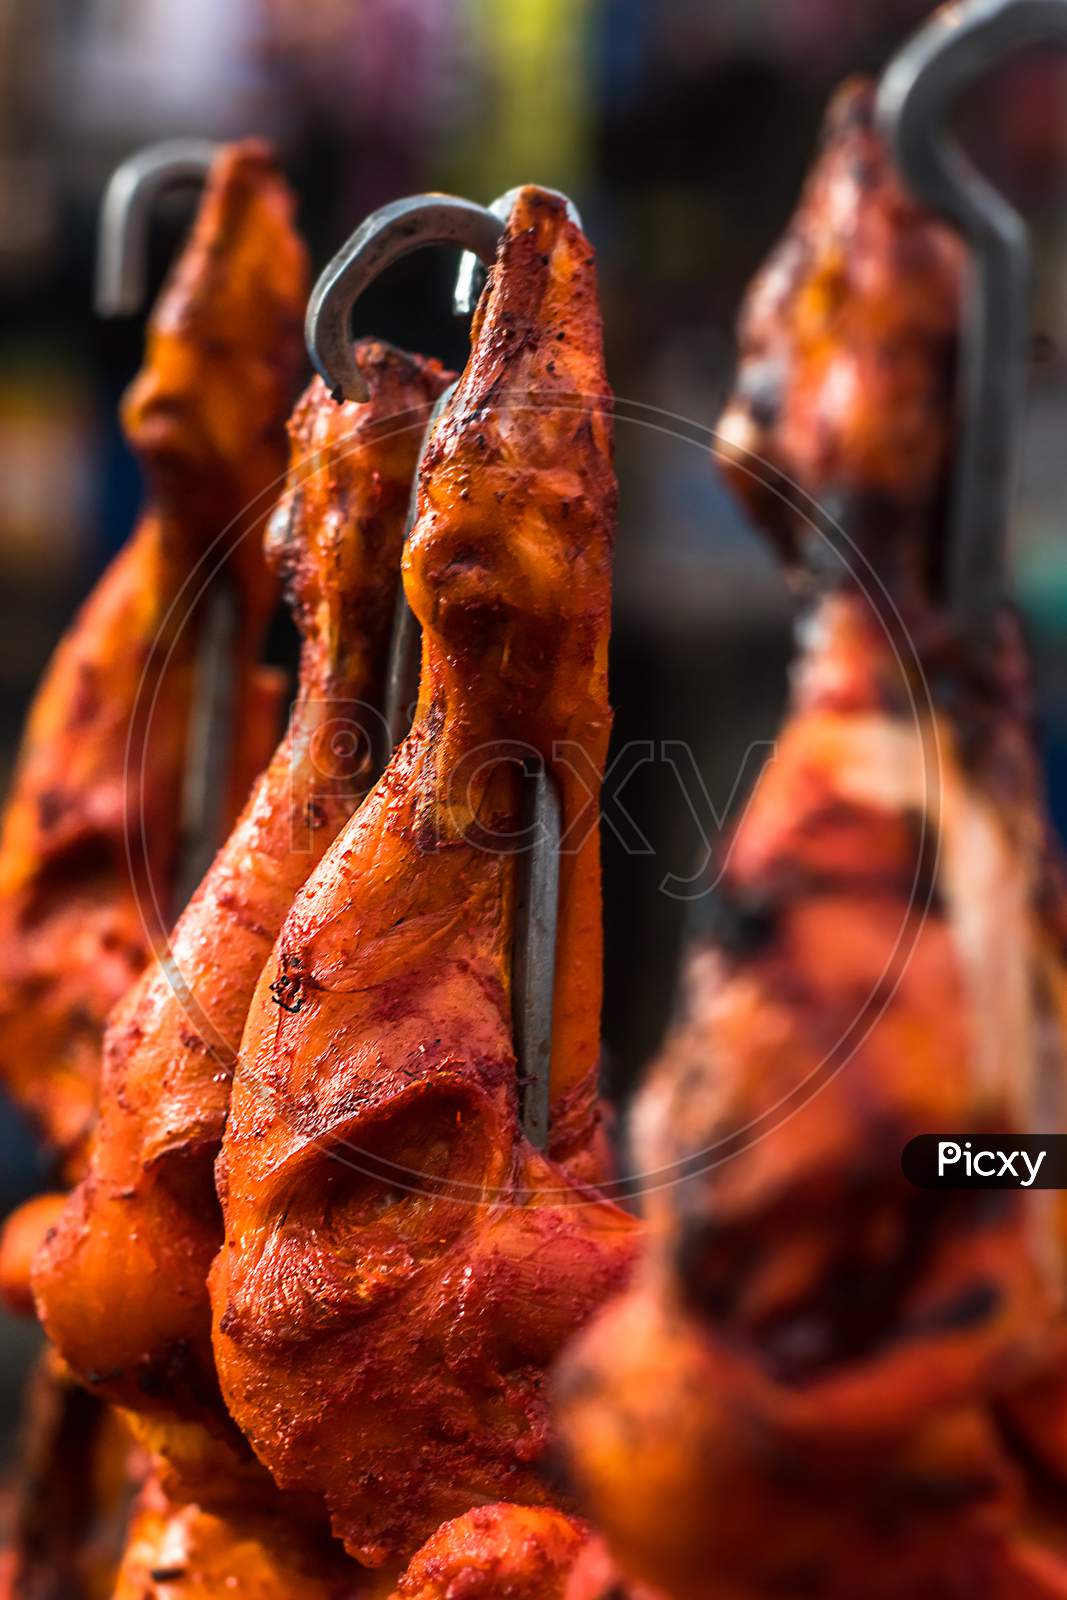 Indian Style Roasted Chicken Or Tandoori Chicken. Indian Non Vegetarian Food. - Image